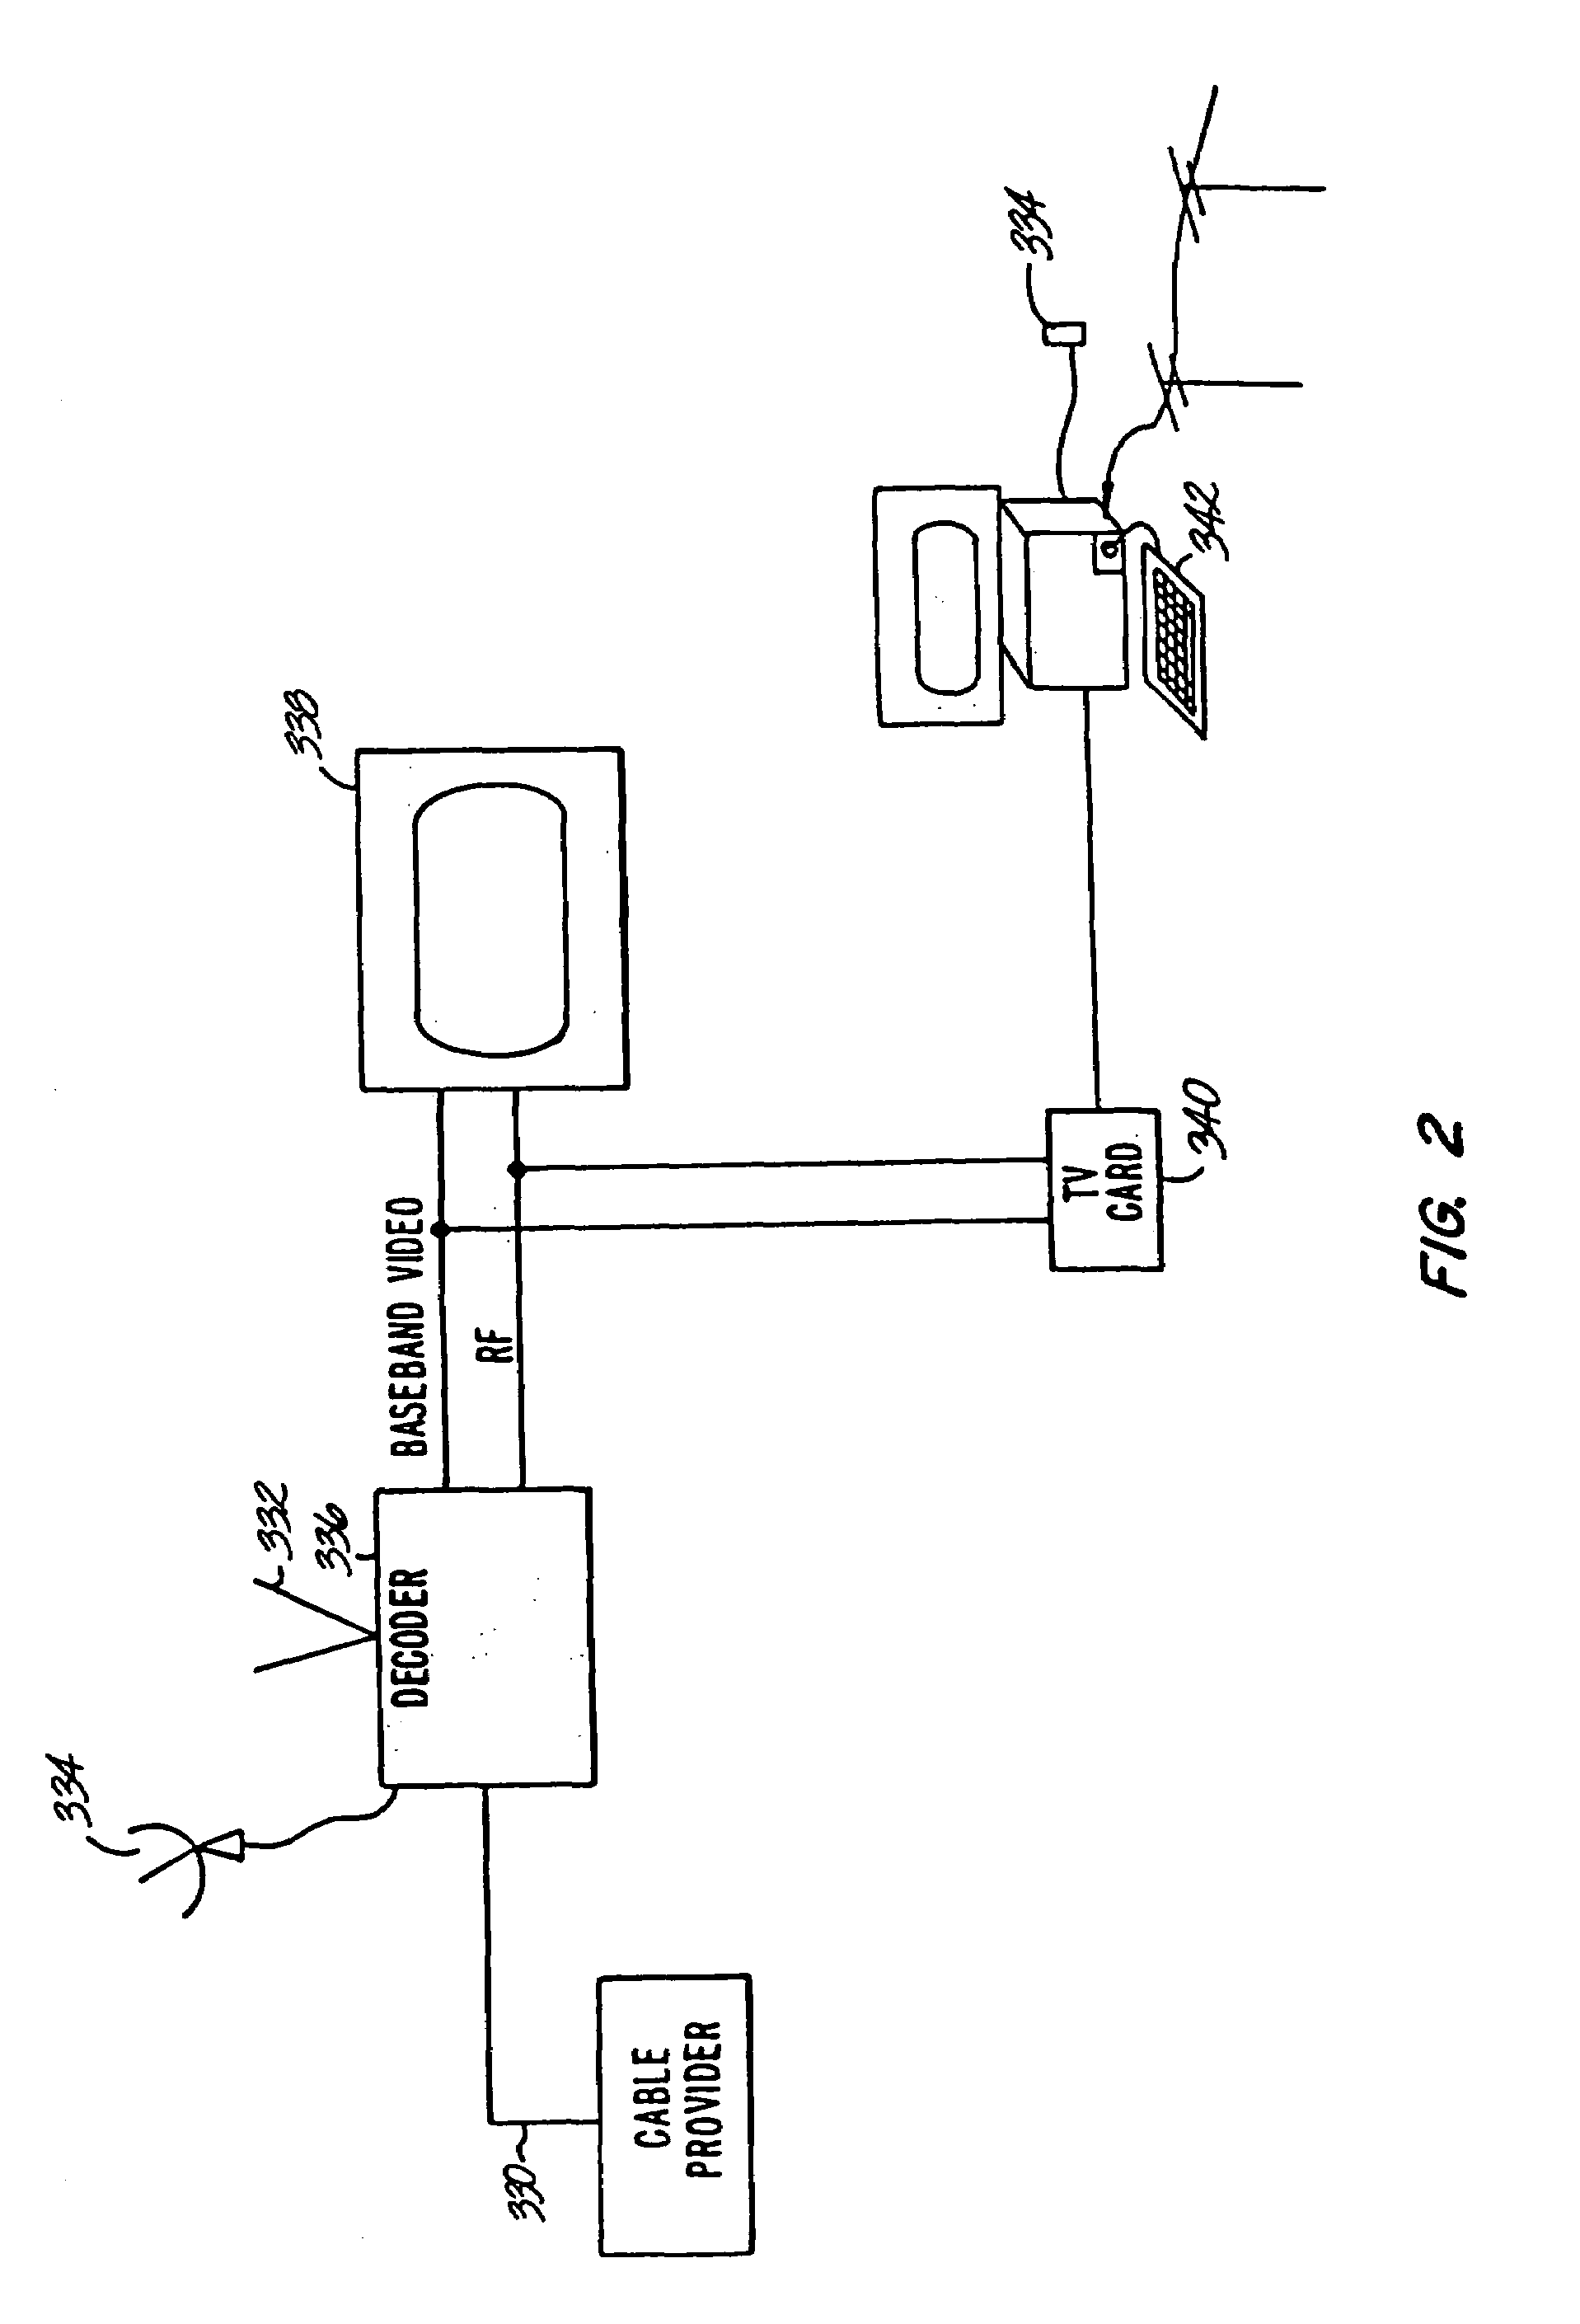 Television control interface with electronic guide